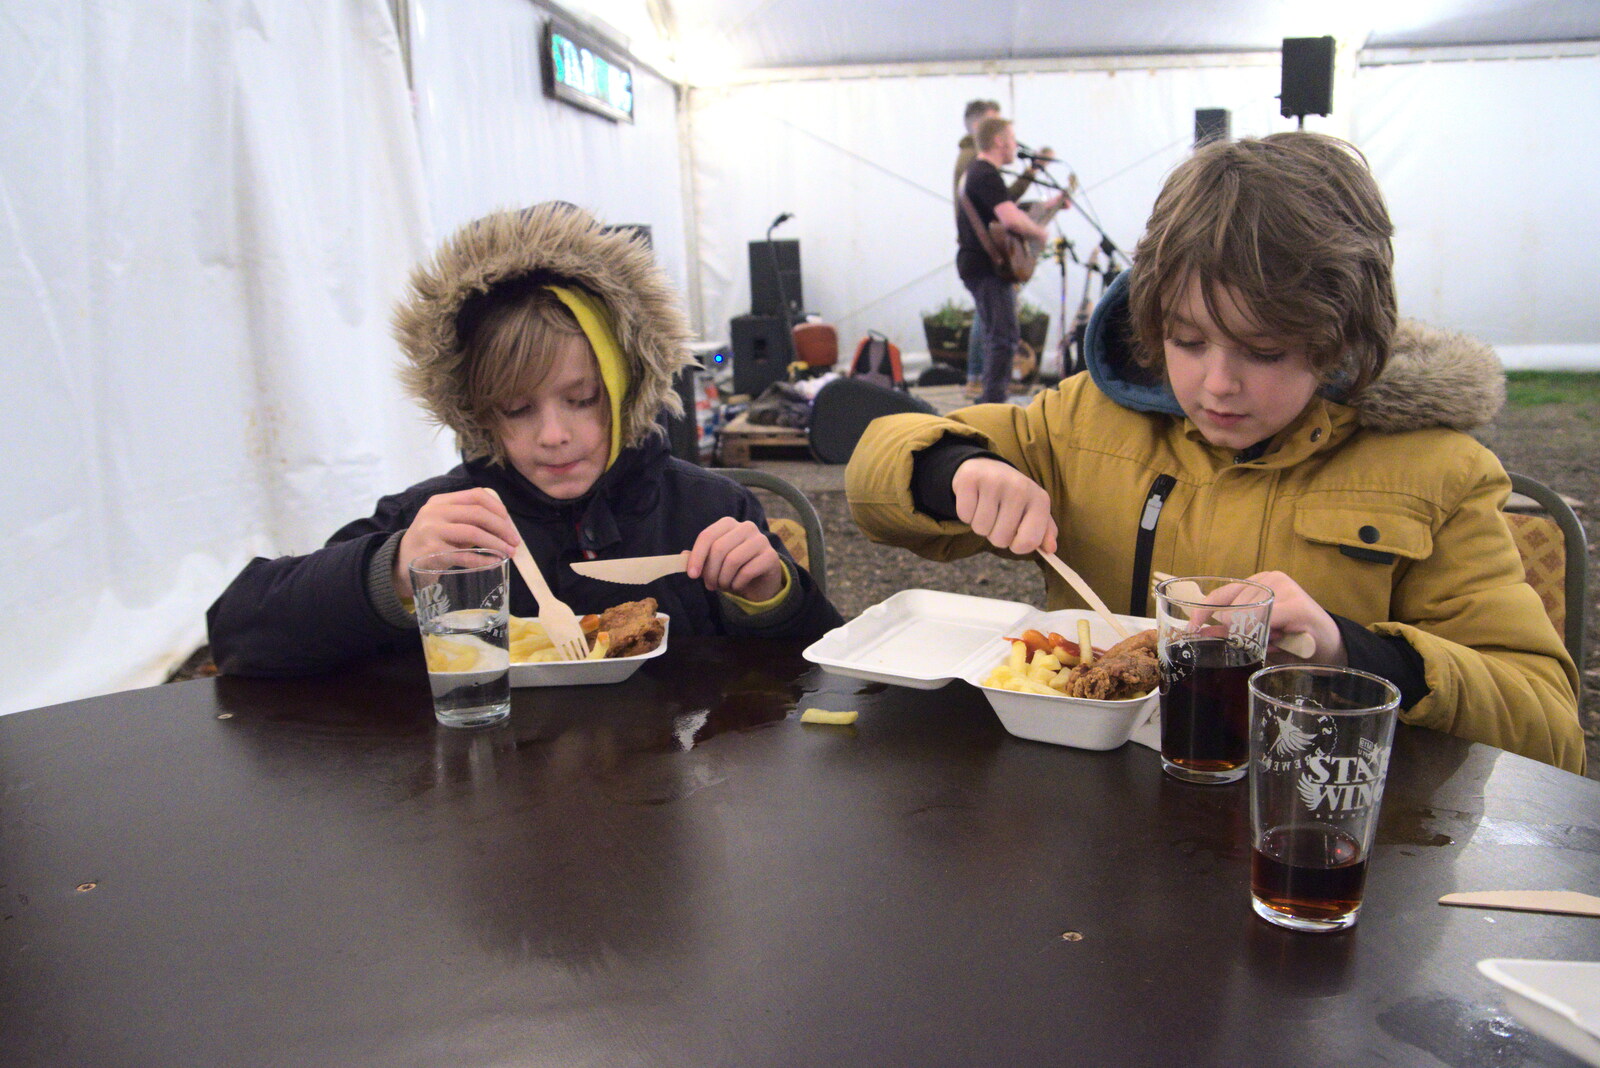 The Boys get some chicken and chips from a van from The Star Wing Winter Beer Fest, Redgrave, Suffolk - 31st January 2020